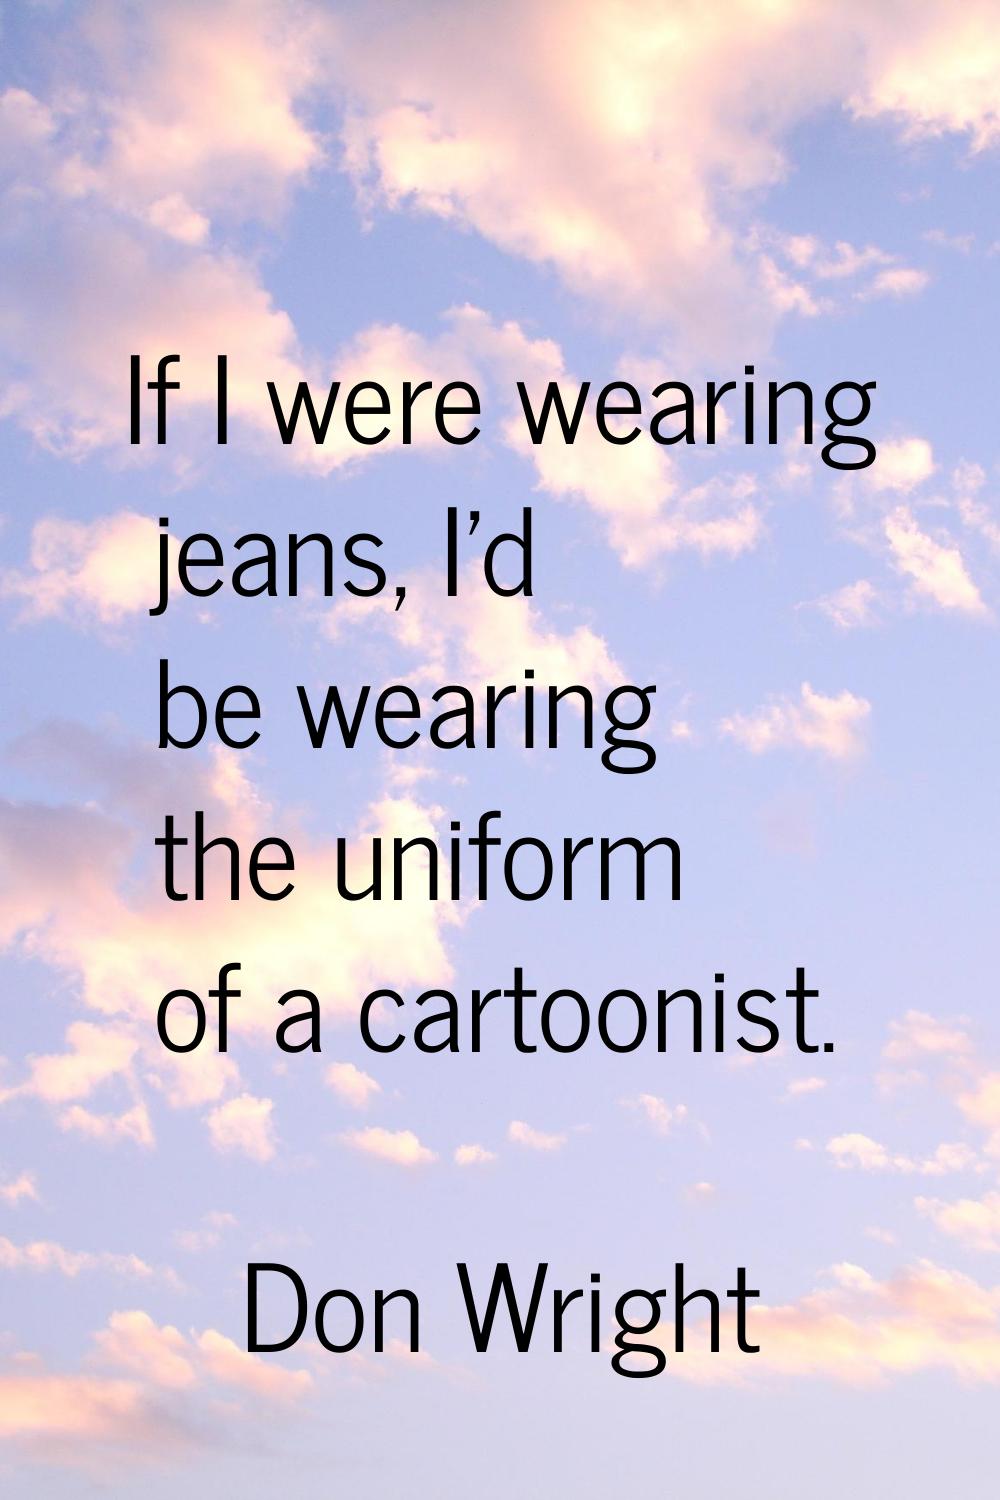 If I were wearing jeans, I'd be wearing the uniform of a cartoonist.